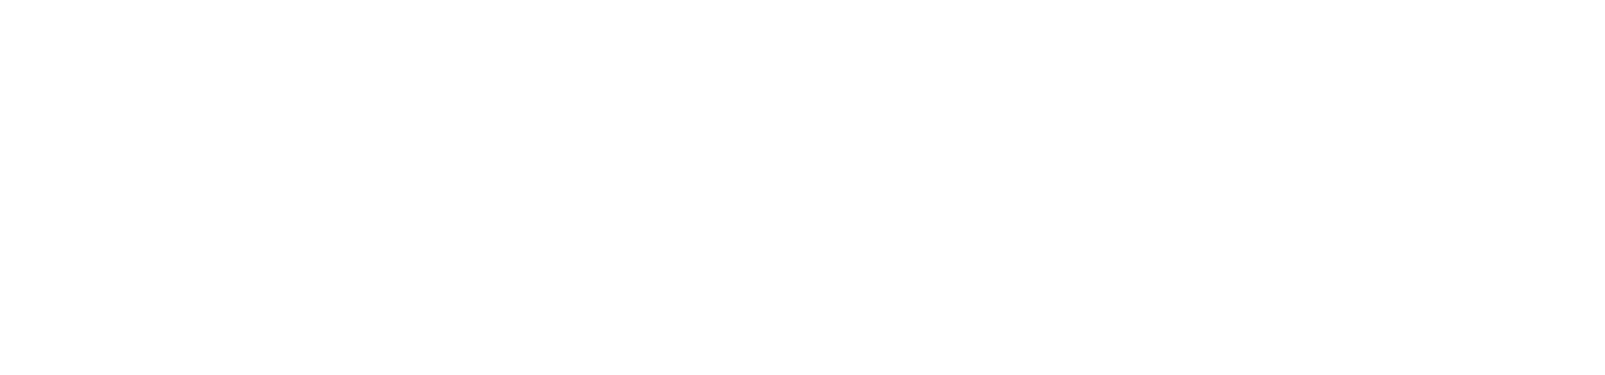 Capstone Green Energy logo large for dark backgrounds (transparent PNG)